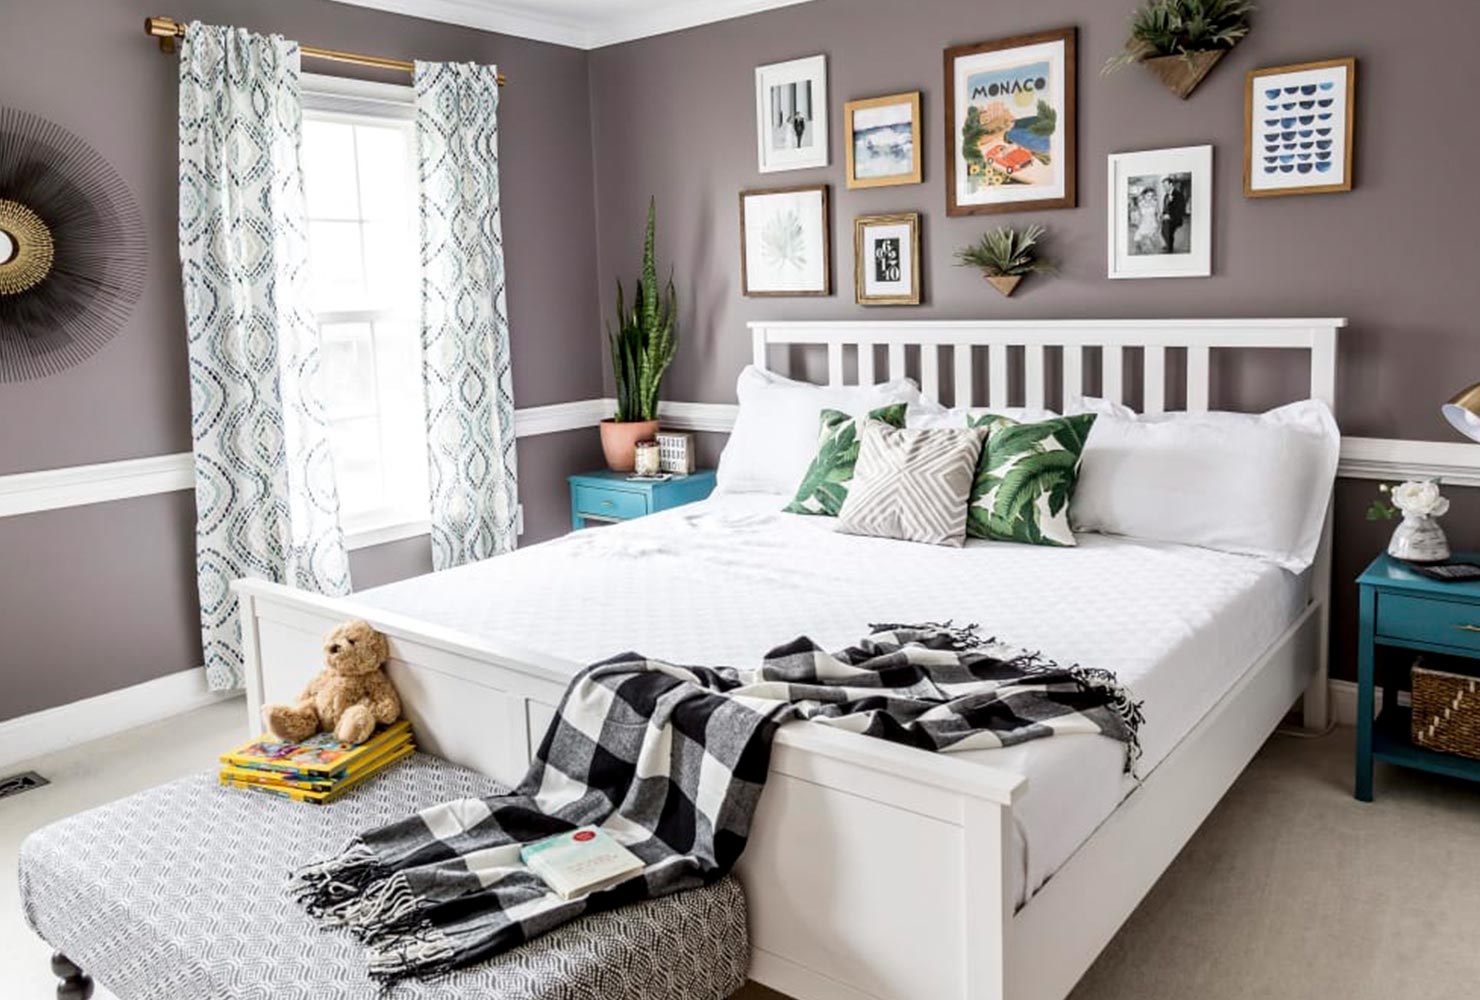 20 Ways To Decorate A Small  Bedroom  Shutterfly